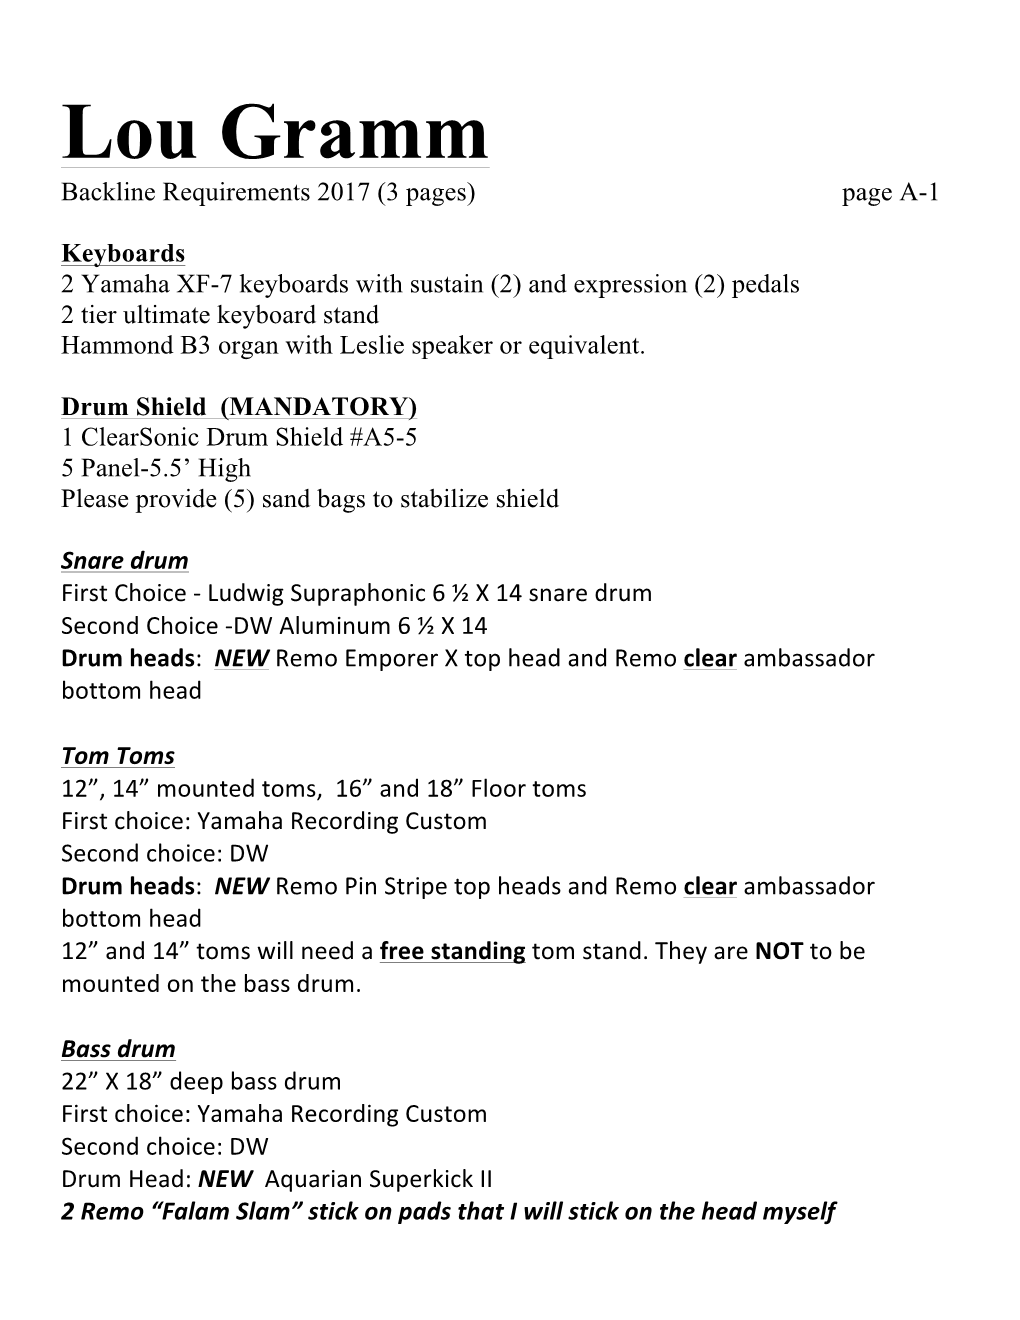 Lou Gramm Backline Requirements 2017 (3 Pages) Page A-1